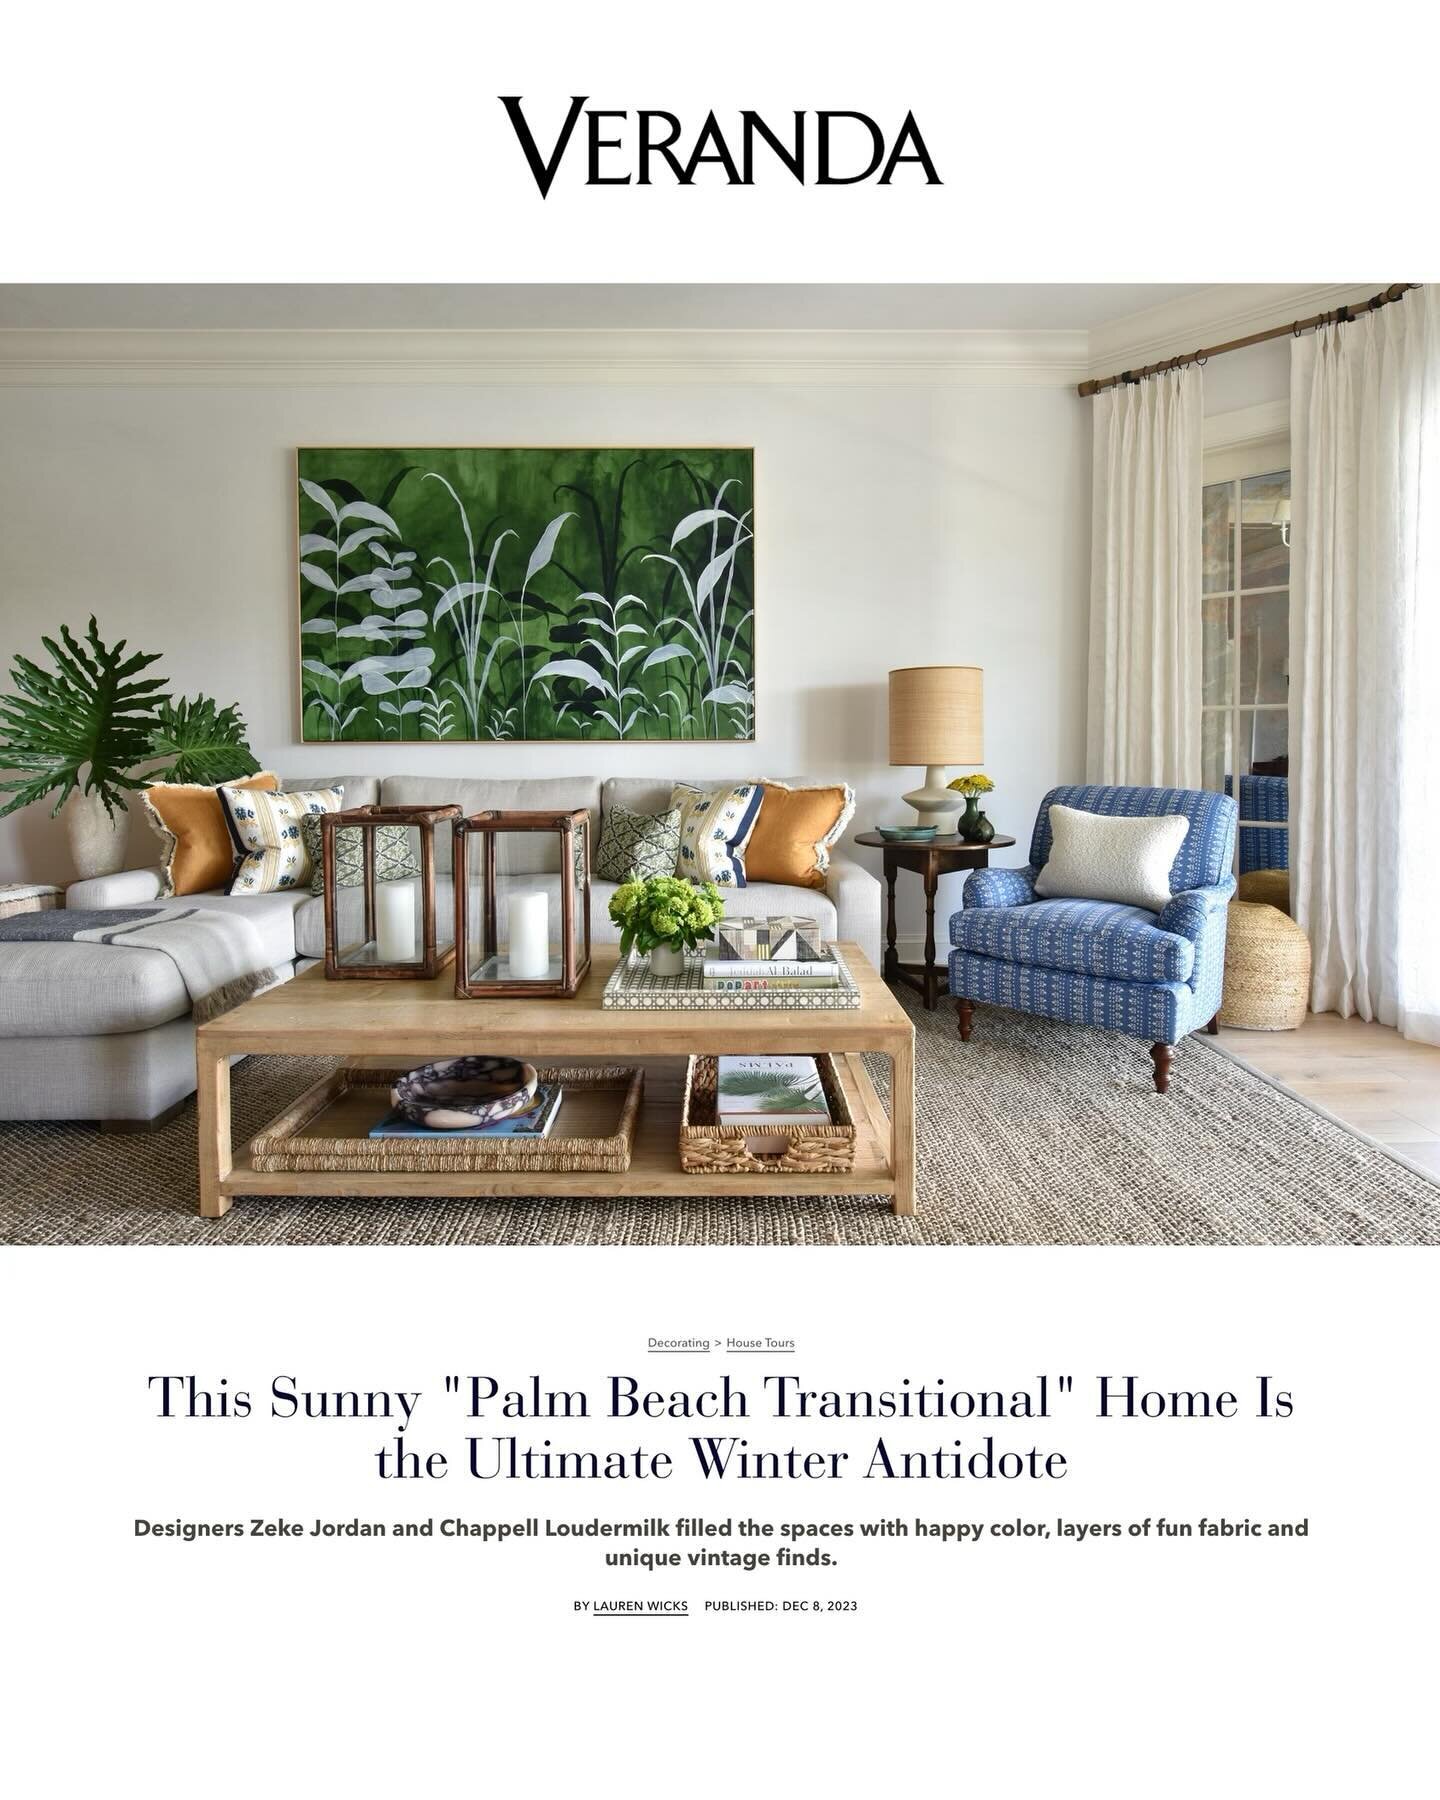 Incredibly honored for our first project to be featured in @verandamag! A big thank you to @steelemarcoux @jaimemmilan @grace__haynes and @lo_wicks for this beautiful feature. 

Thank you to Molly Bates @sba.pr for her invaluable help. 

Thank you to